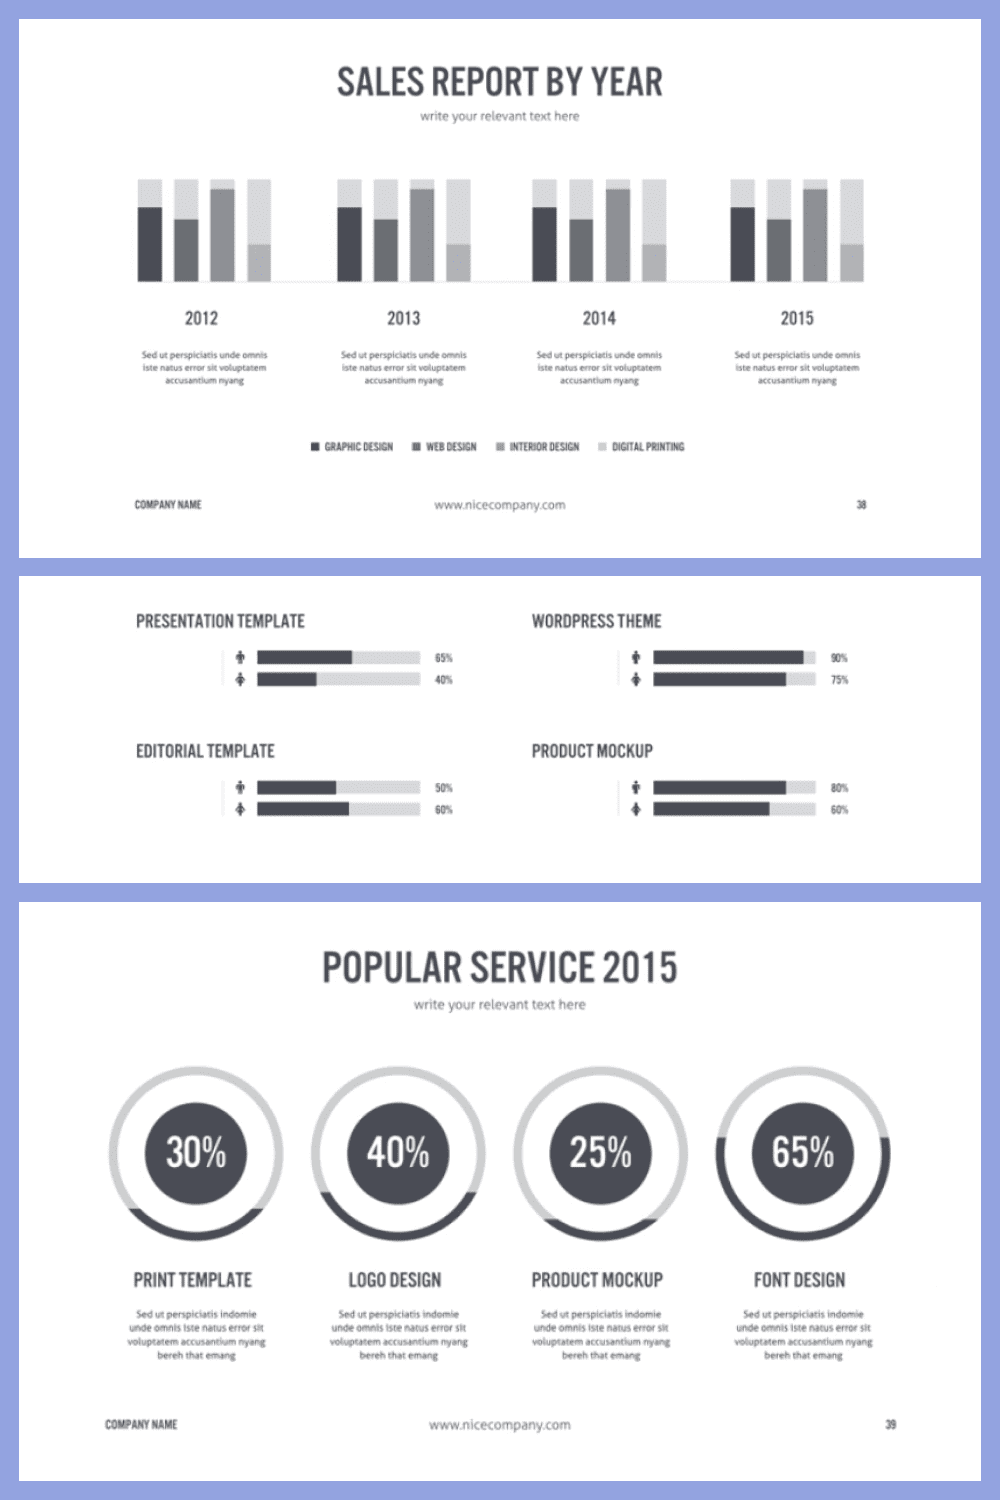 It's cool to create reports and presentations for top management with this template.